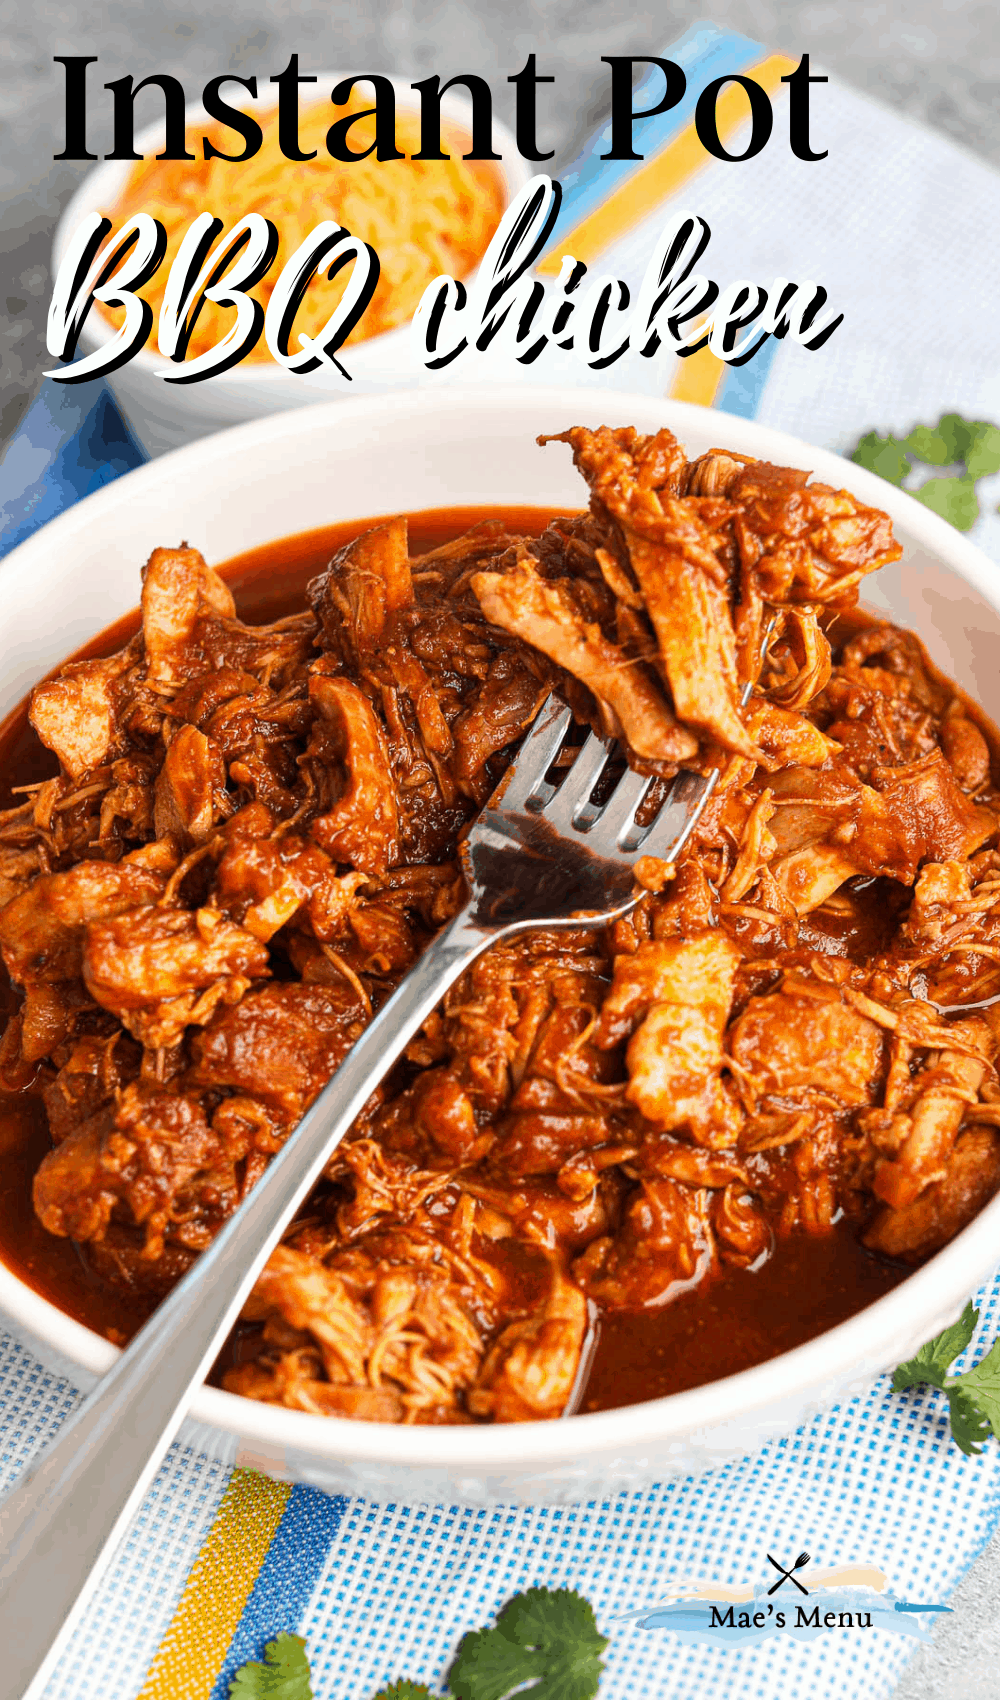 A pinterest pin for instant pot bbq chicken -- with an up-close side shot of bbq chicken